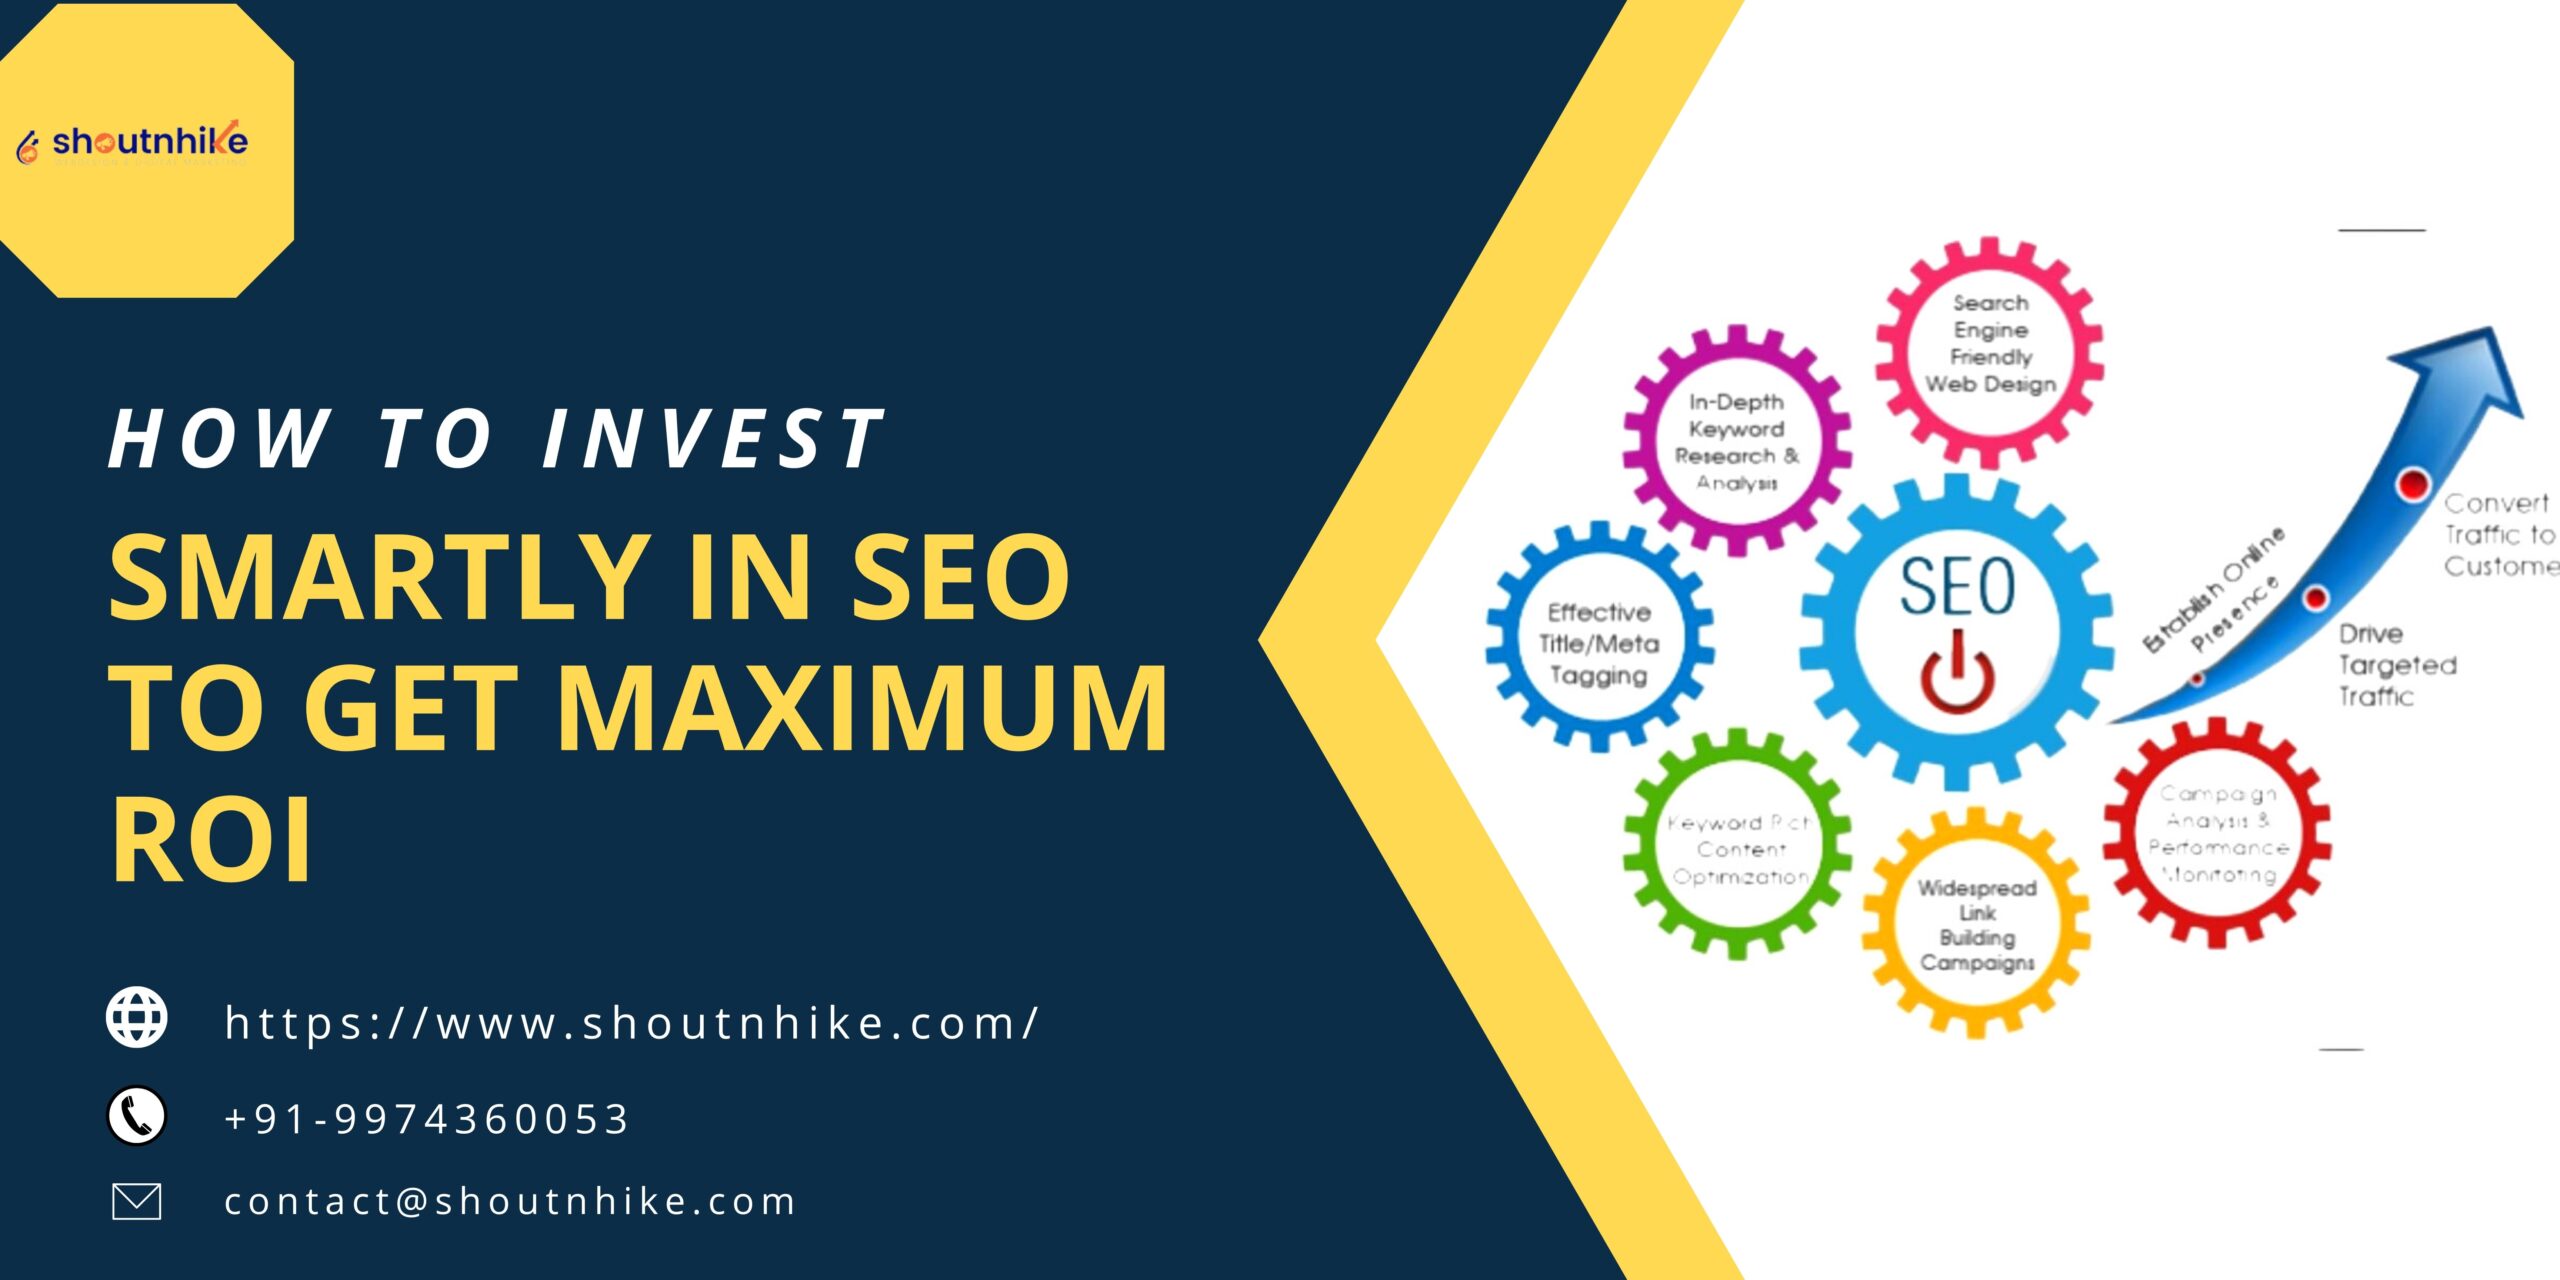 How to invest smartly in SEO to get maximum ROI